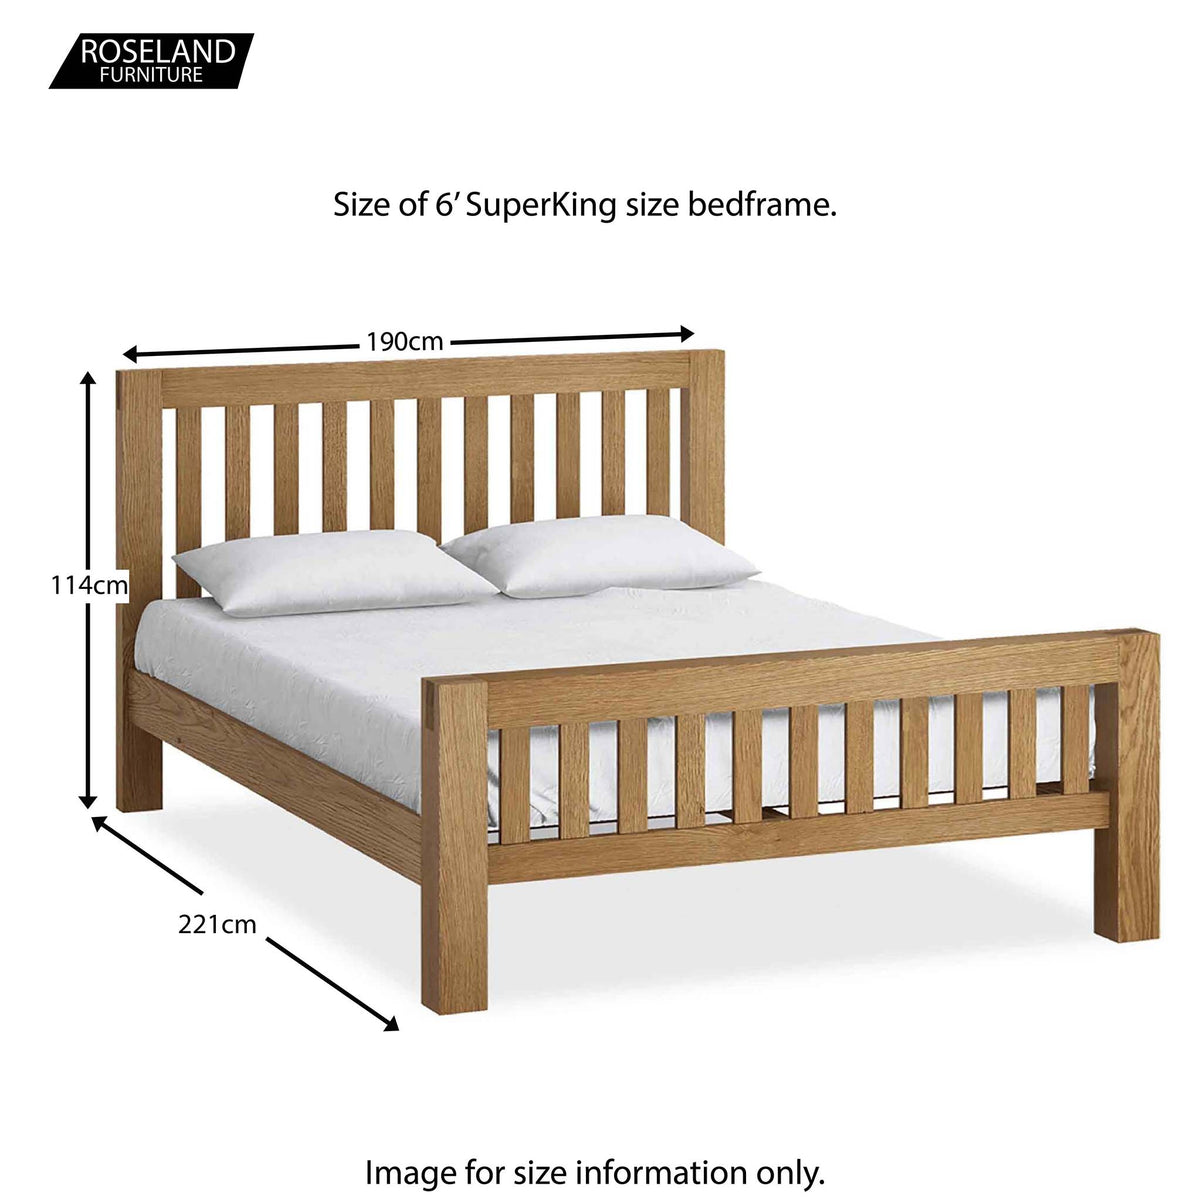 Abbey Super King Size Bed Frame - Size Guide